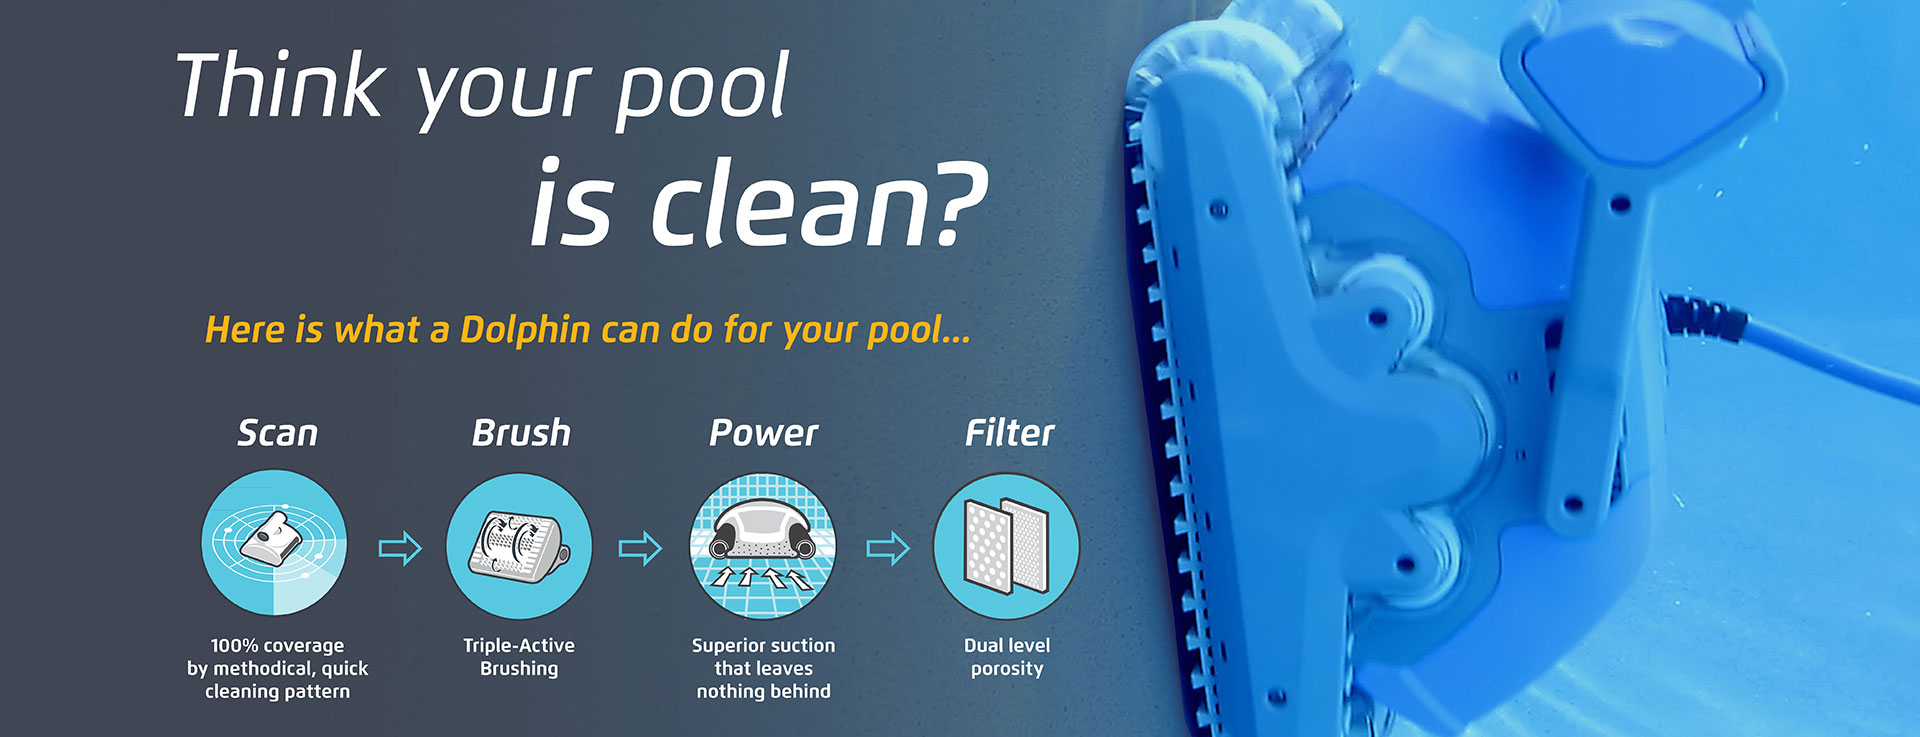 How Often to Use Robotic Pool Cleaner?